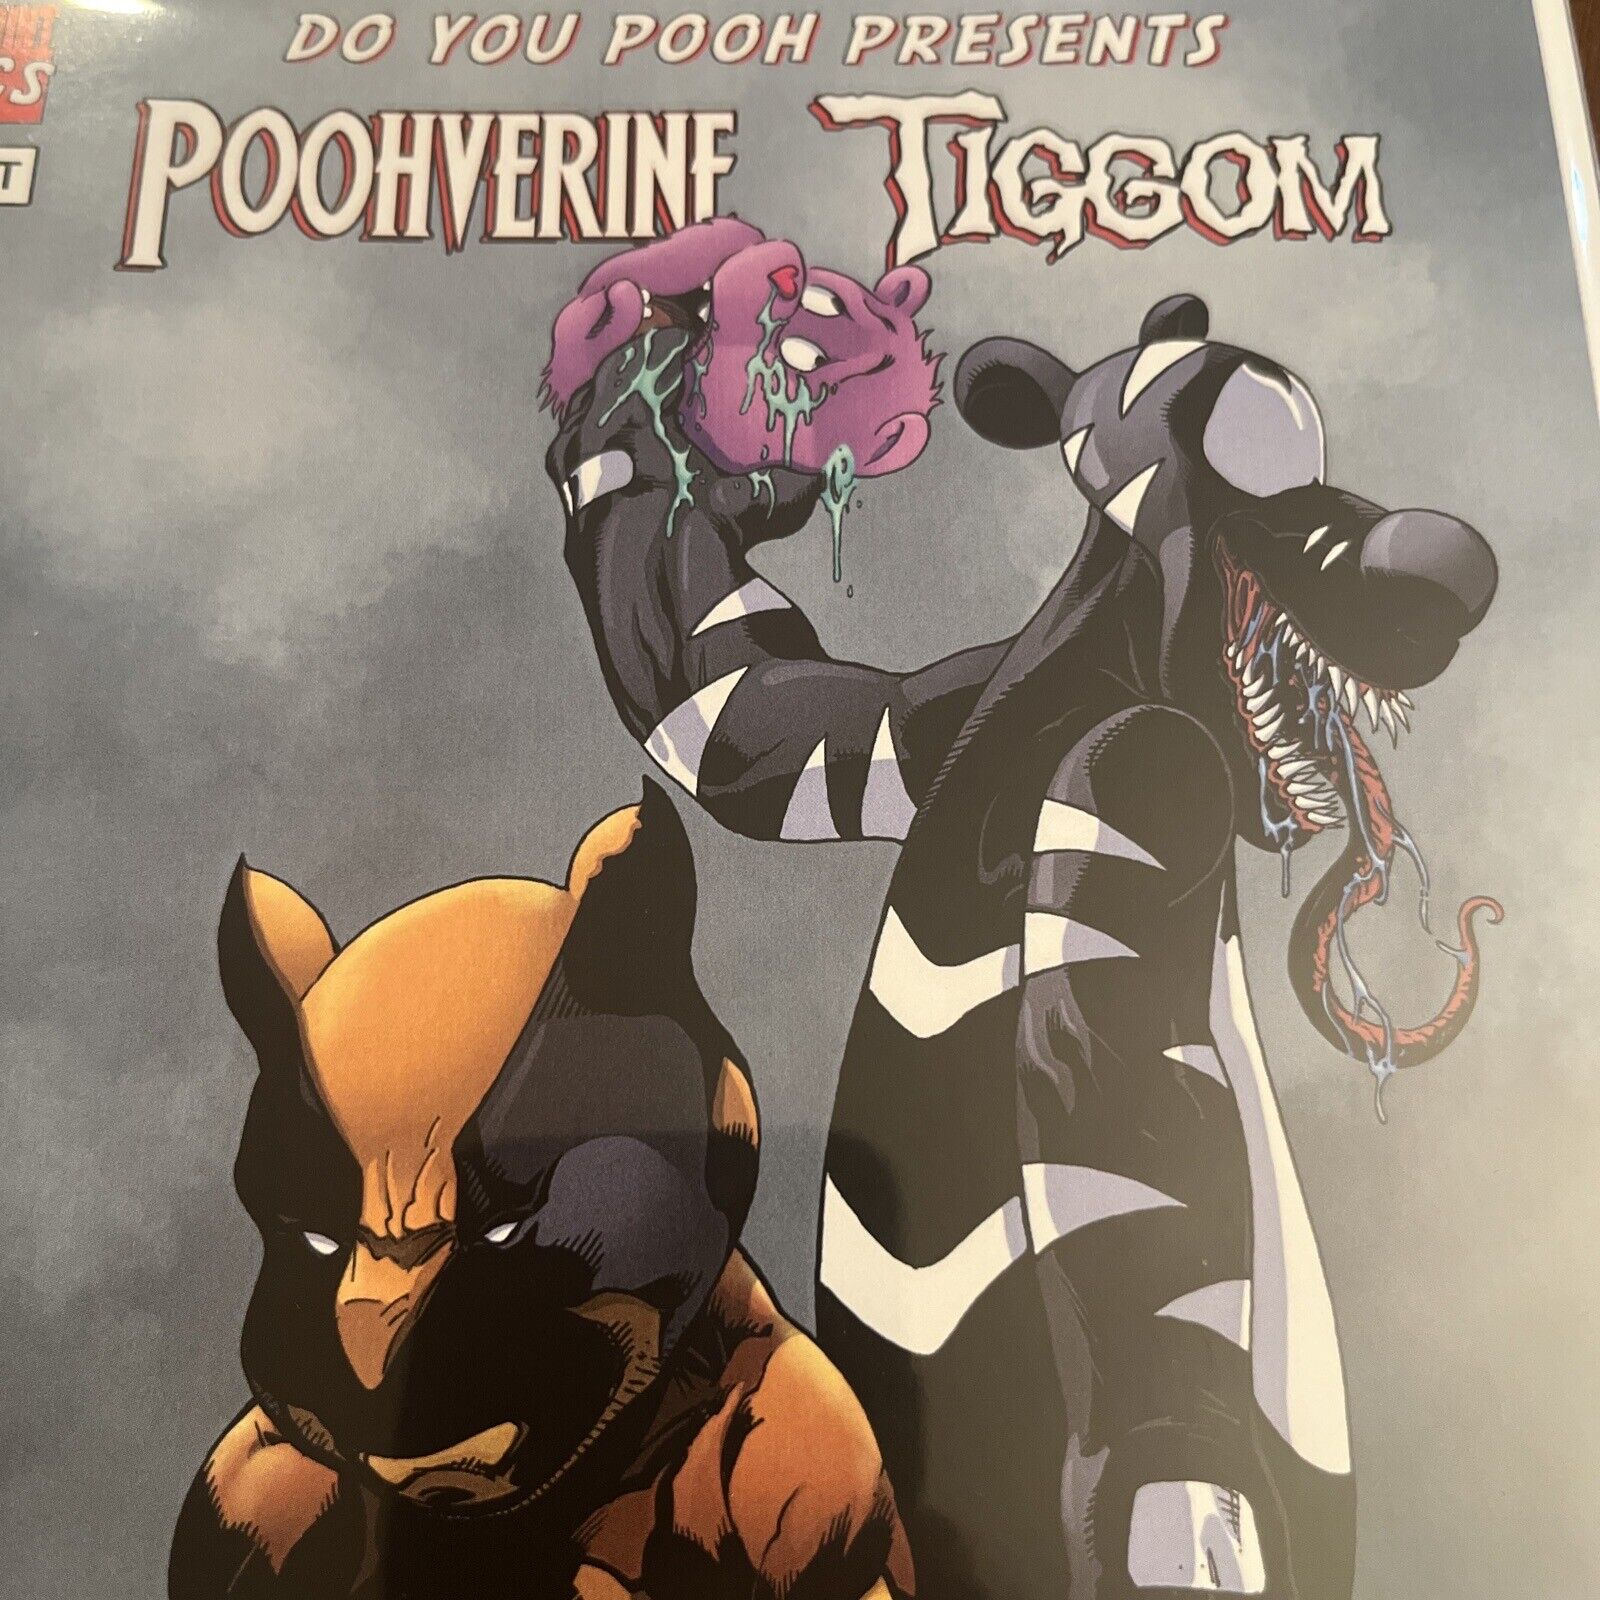 Poohverine Tiggom Limited Edition #92 of 165 CounterPoint Comics Do You Pooh